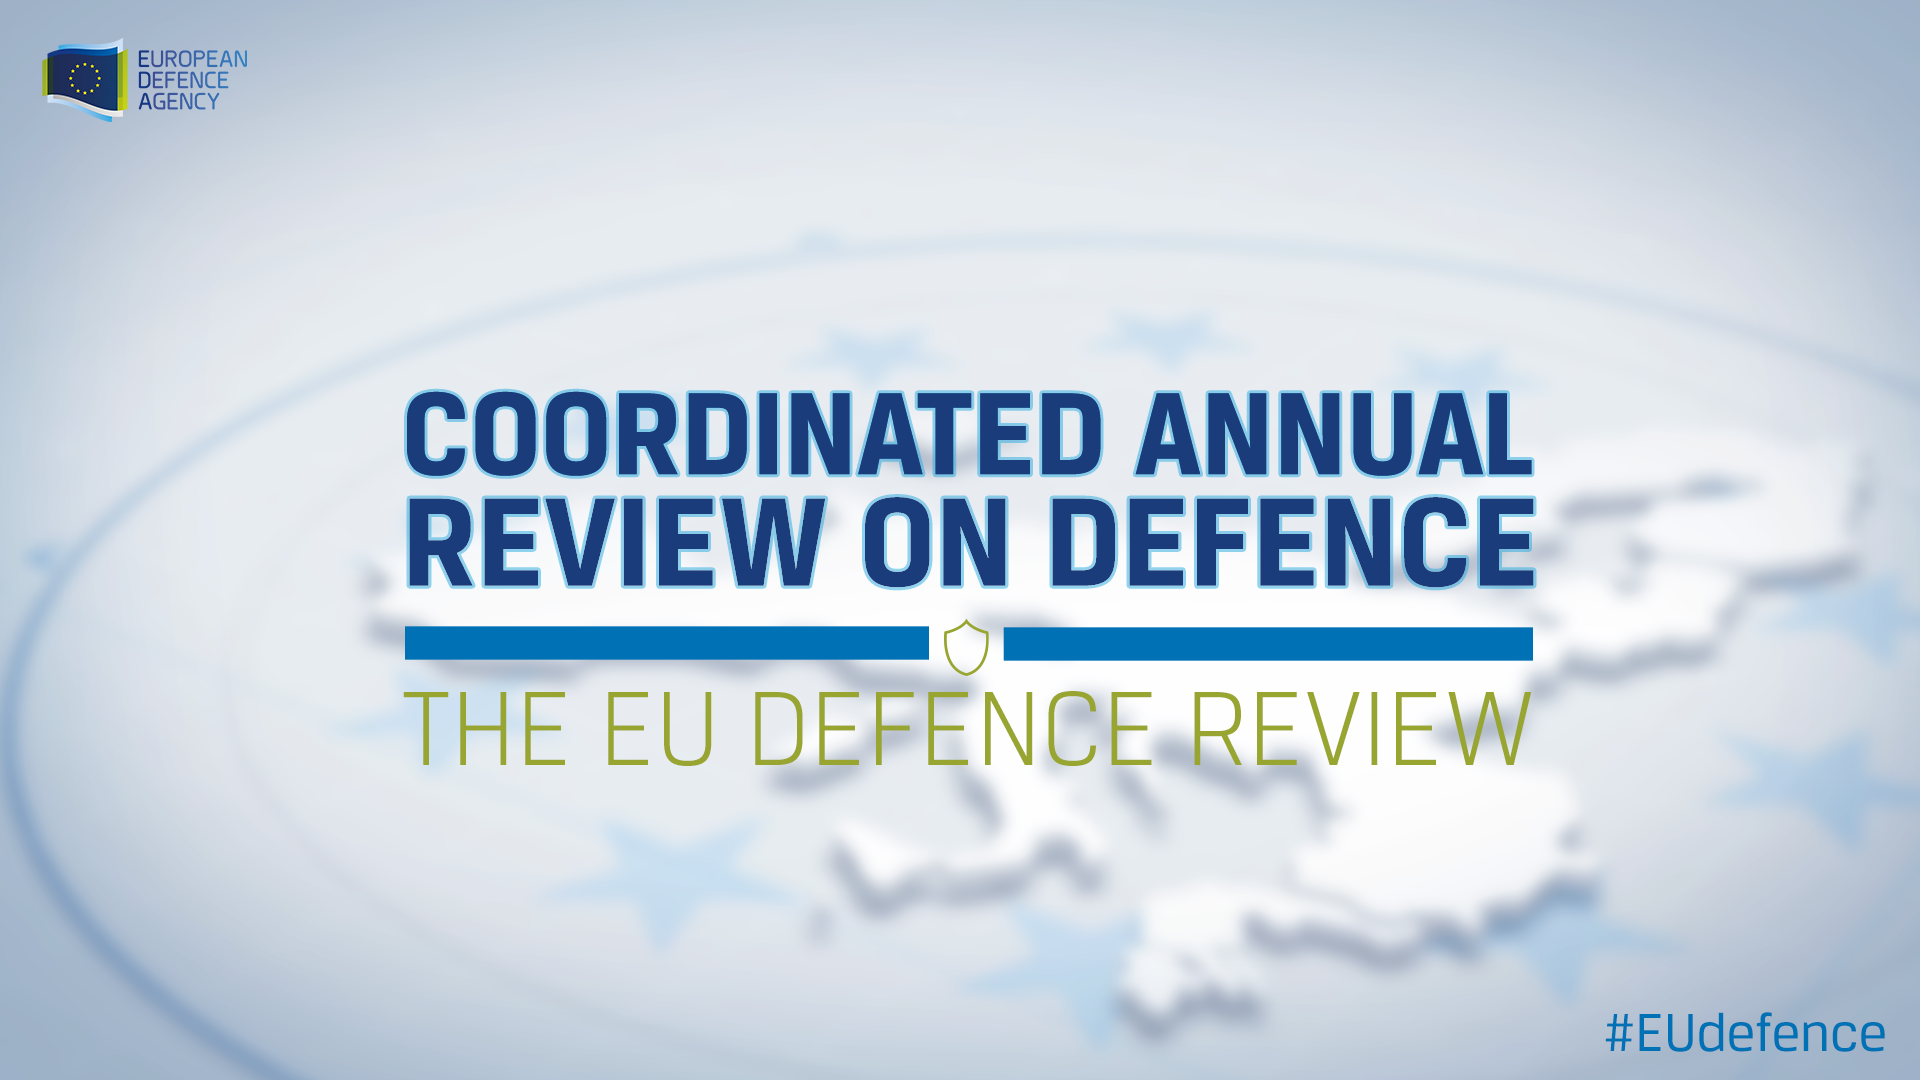 EU Defence Review Calls for Greater European Cooperation to Match Defence Spending Increases